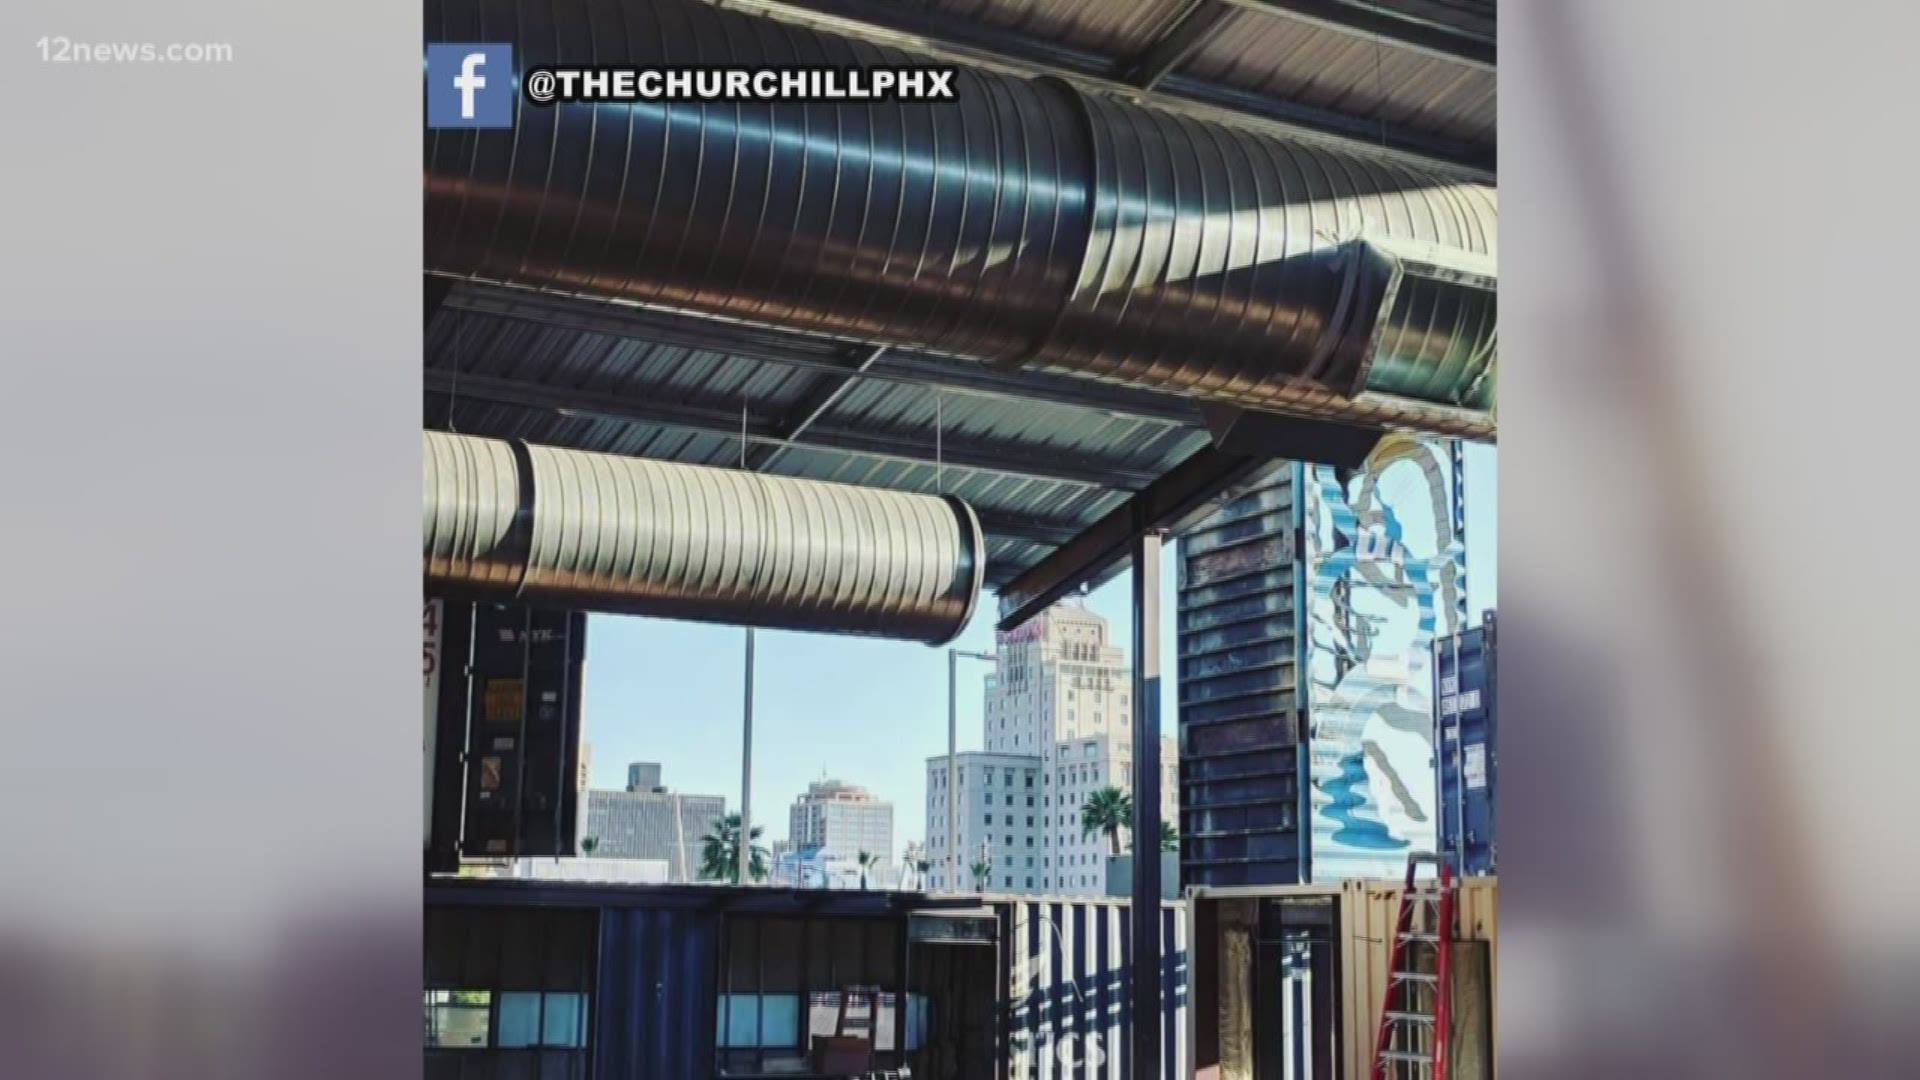 Churchill is a new hangout in downtown Phoenix that is the first of its kind shipping container retail shop.